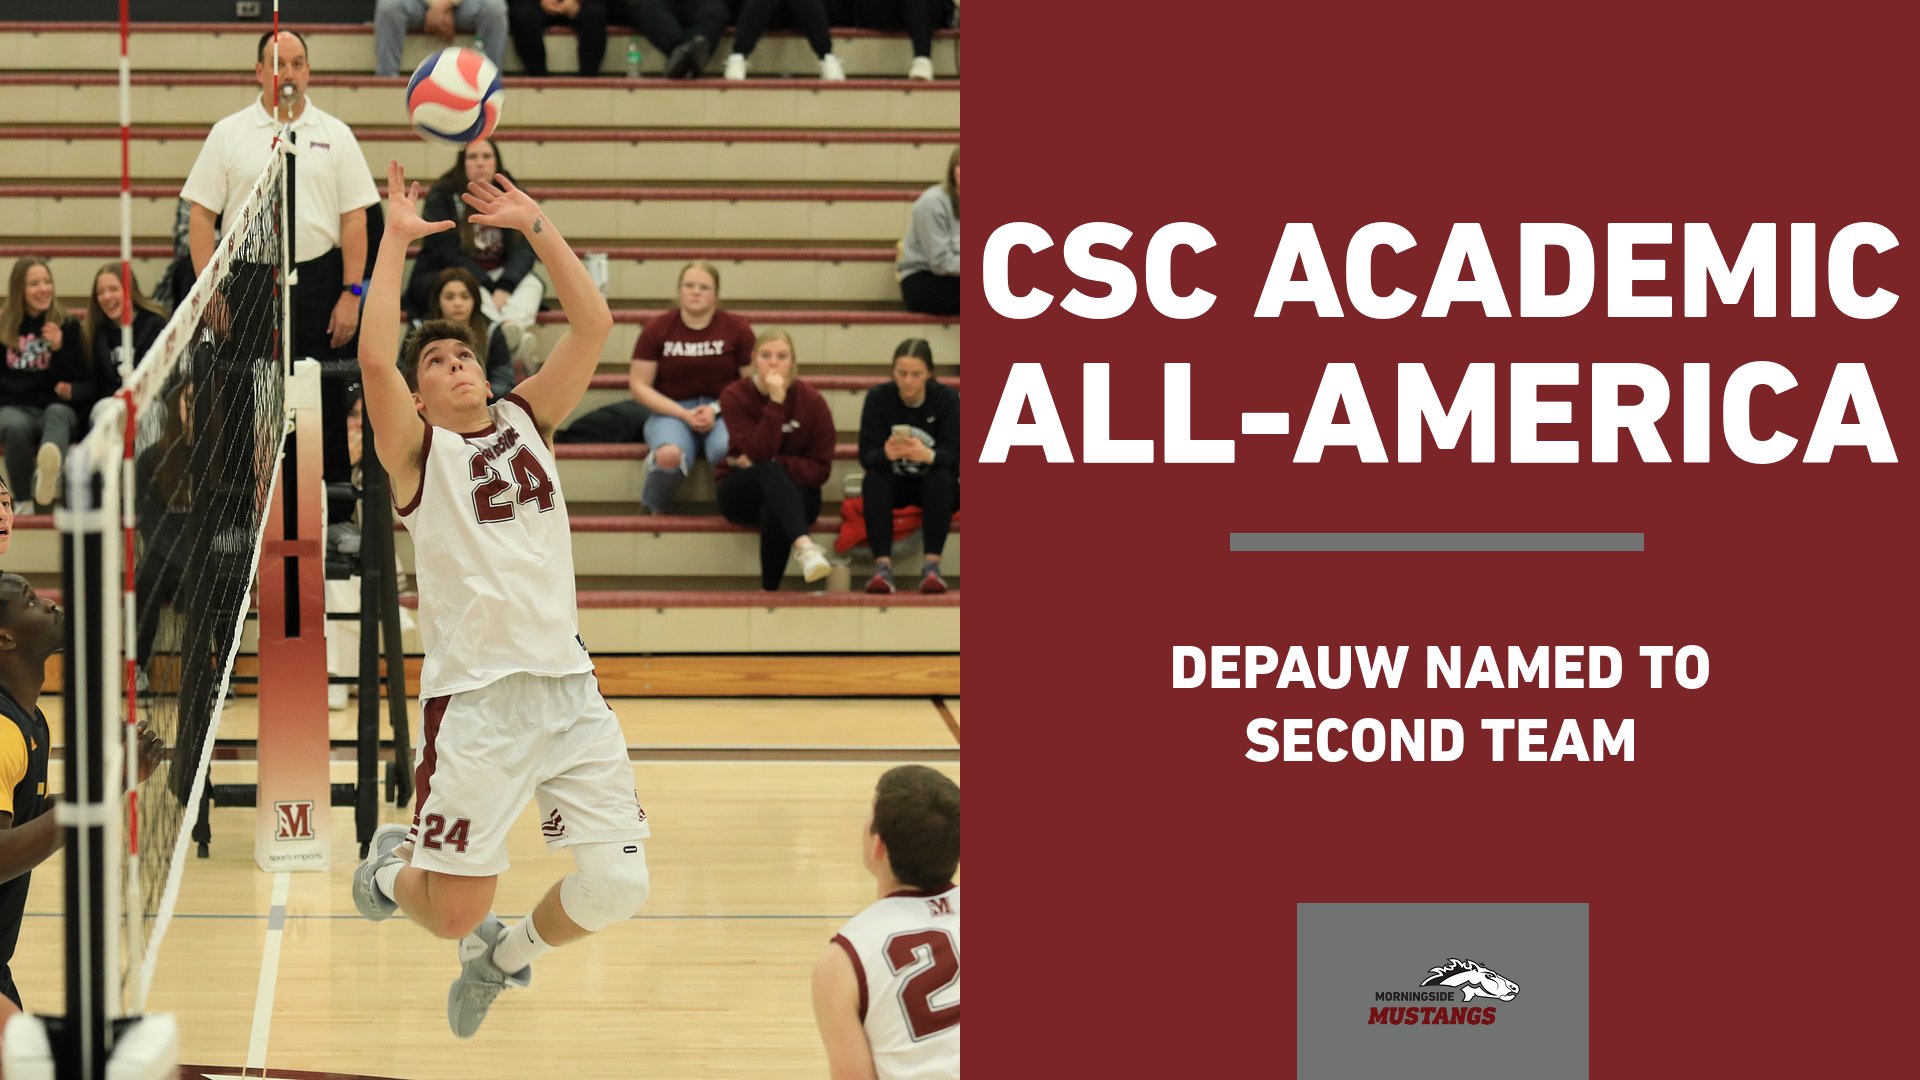 Jacob DePauw named second-team Academic All-American by College Sports Communicators